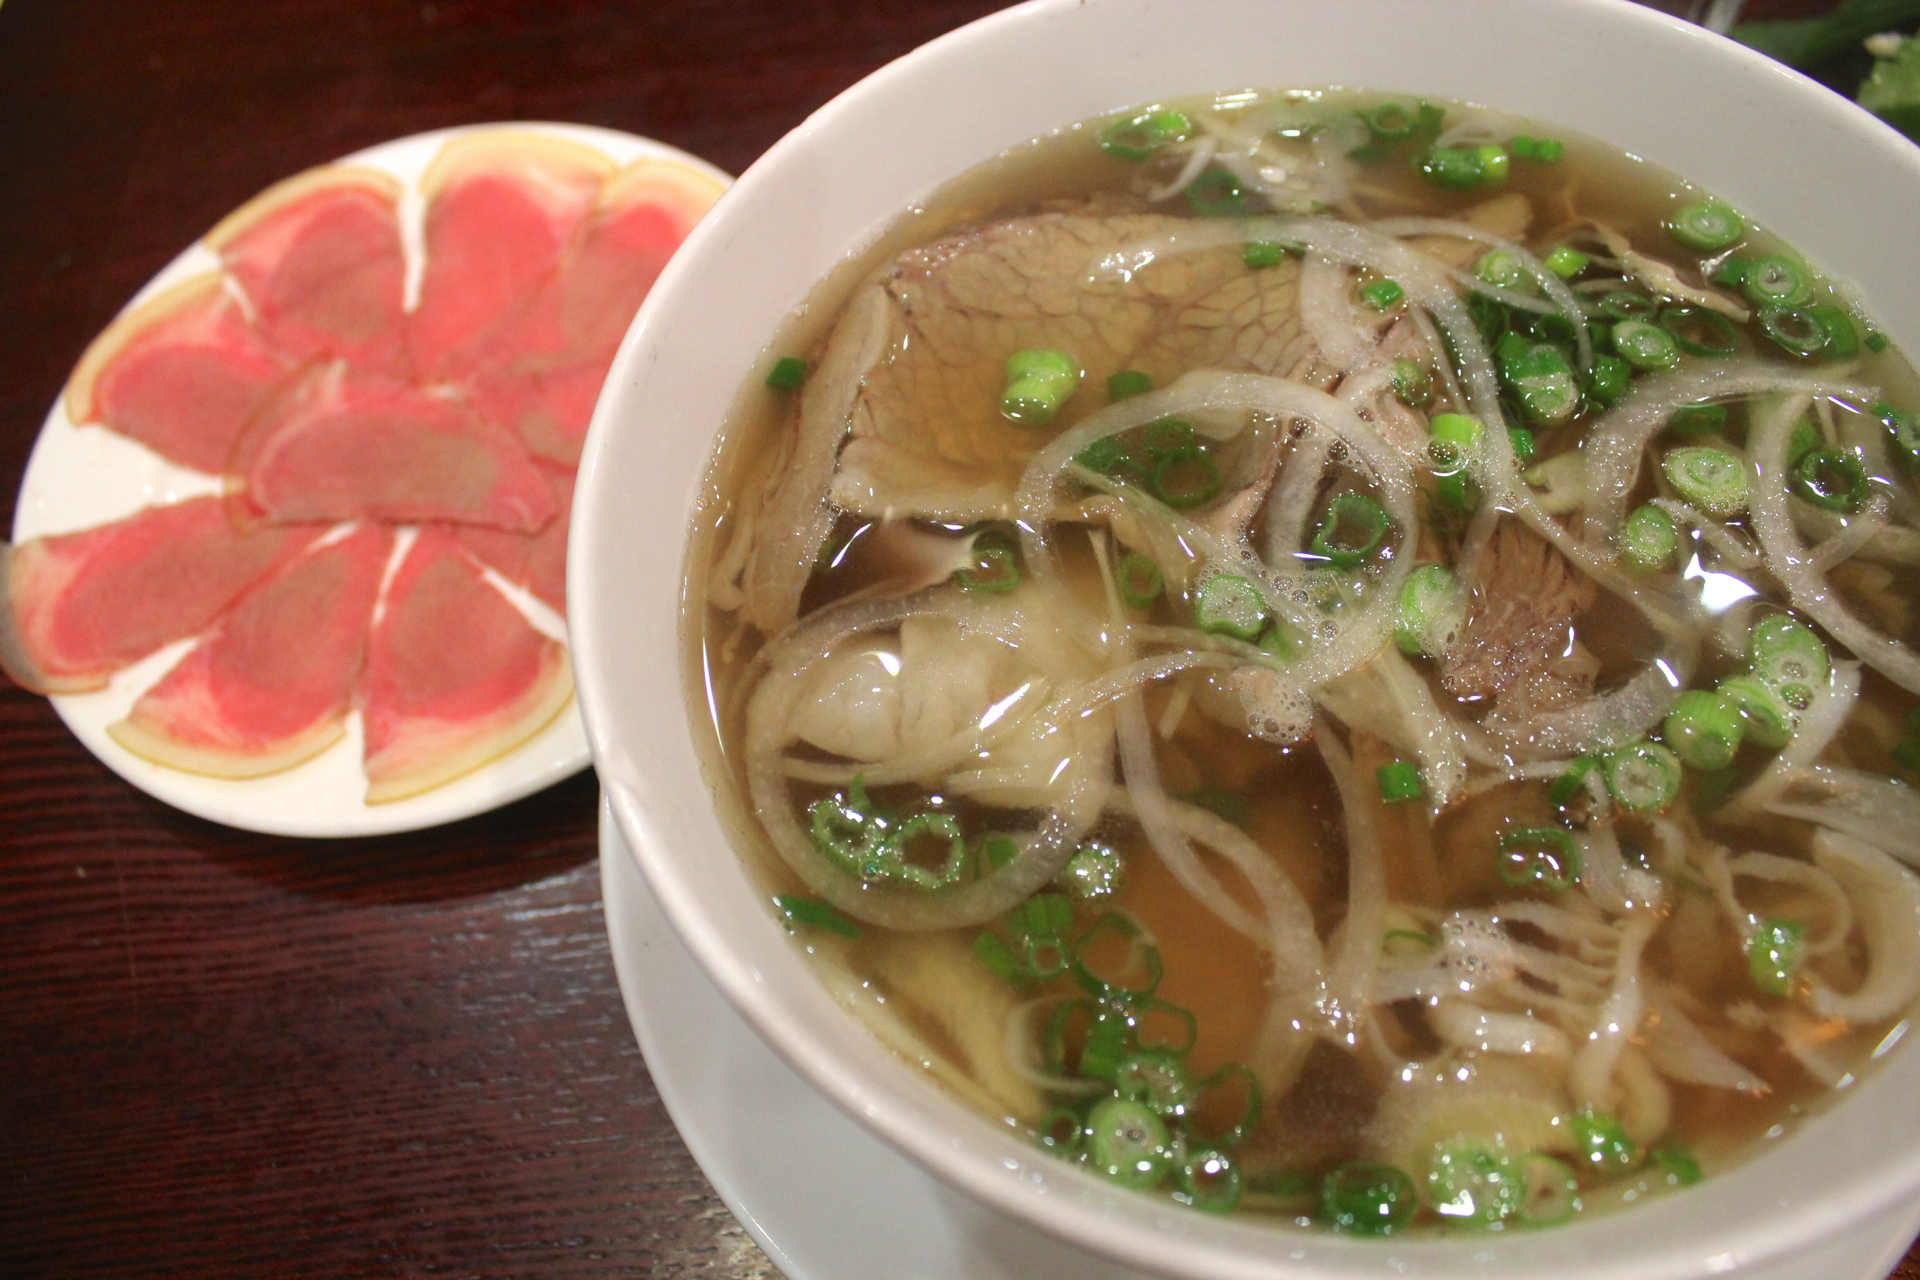 The smoked veal special pho at Pho 90 Degree.